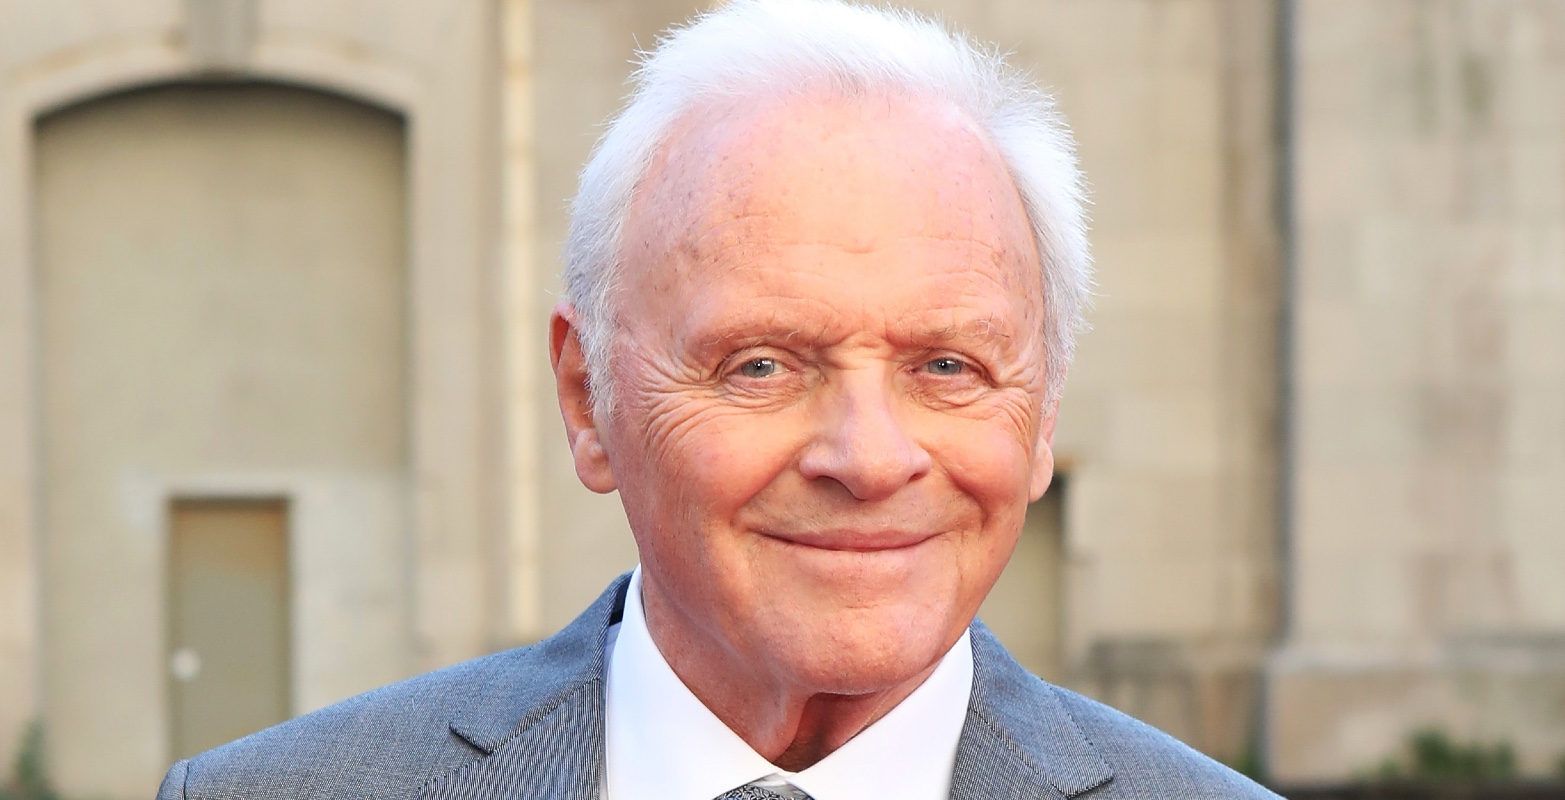 Anthony Hopkins discusses his upcoming role as King Herod in the exciting biblical thriller ‘Mary